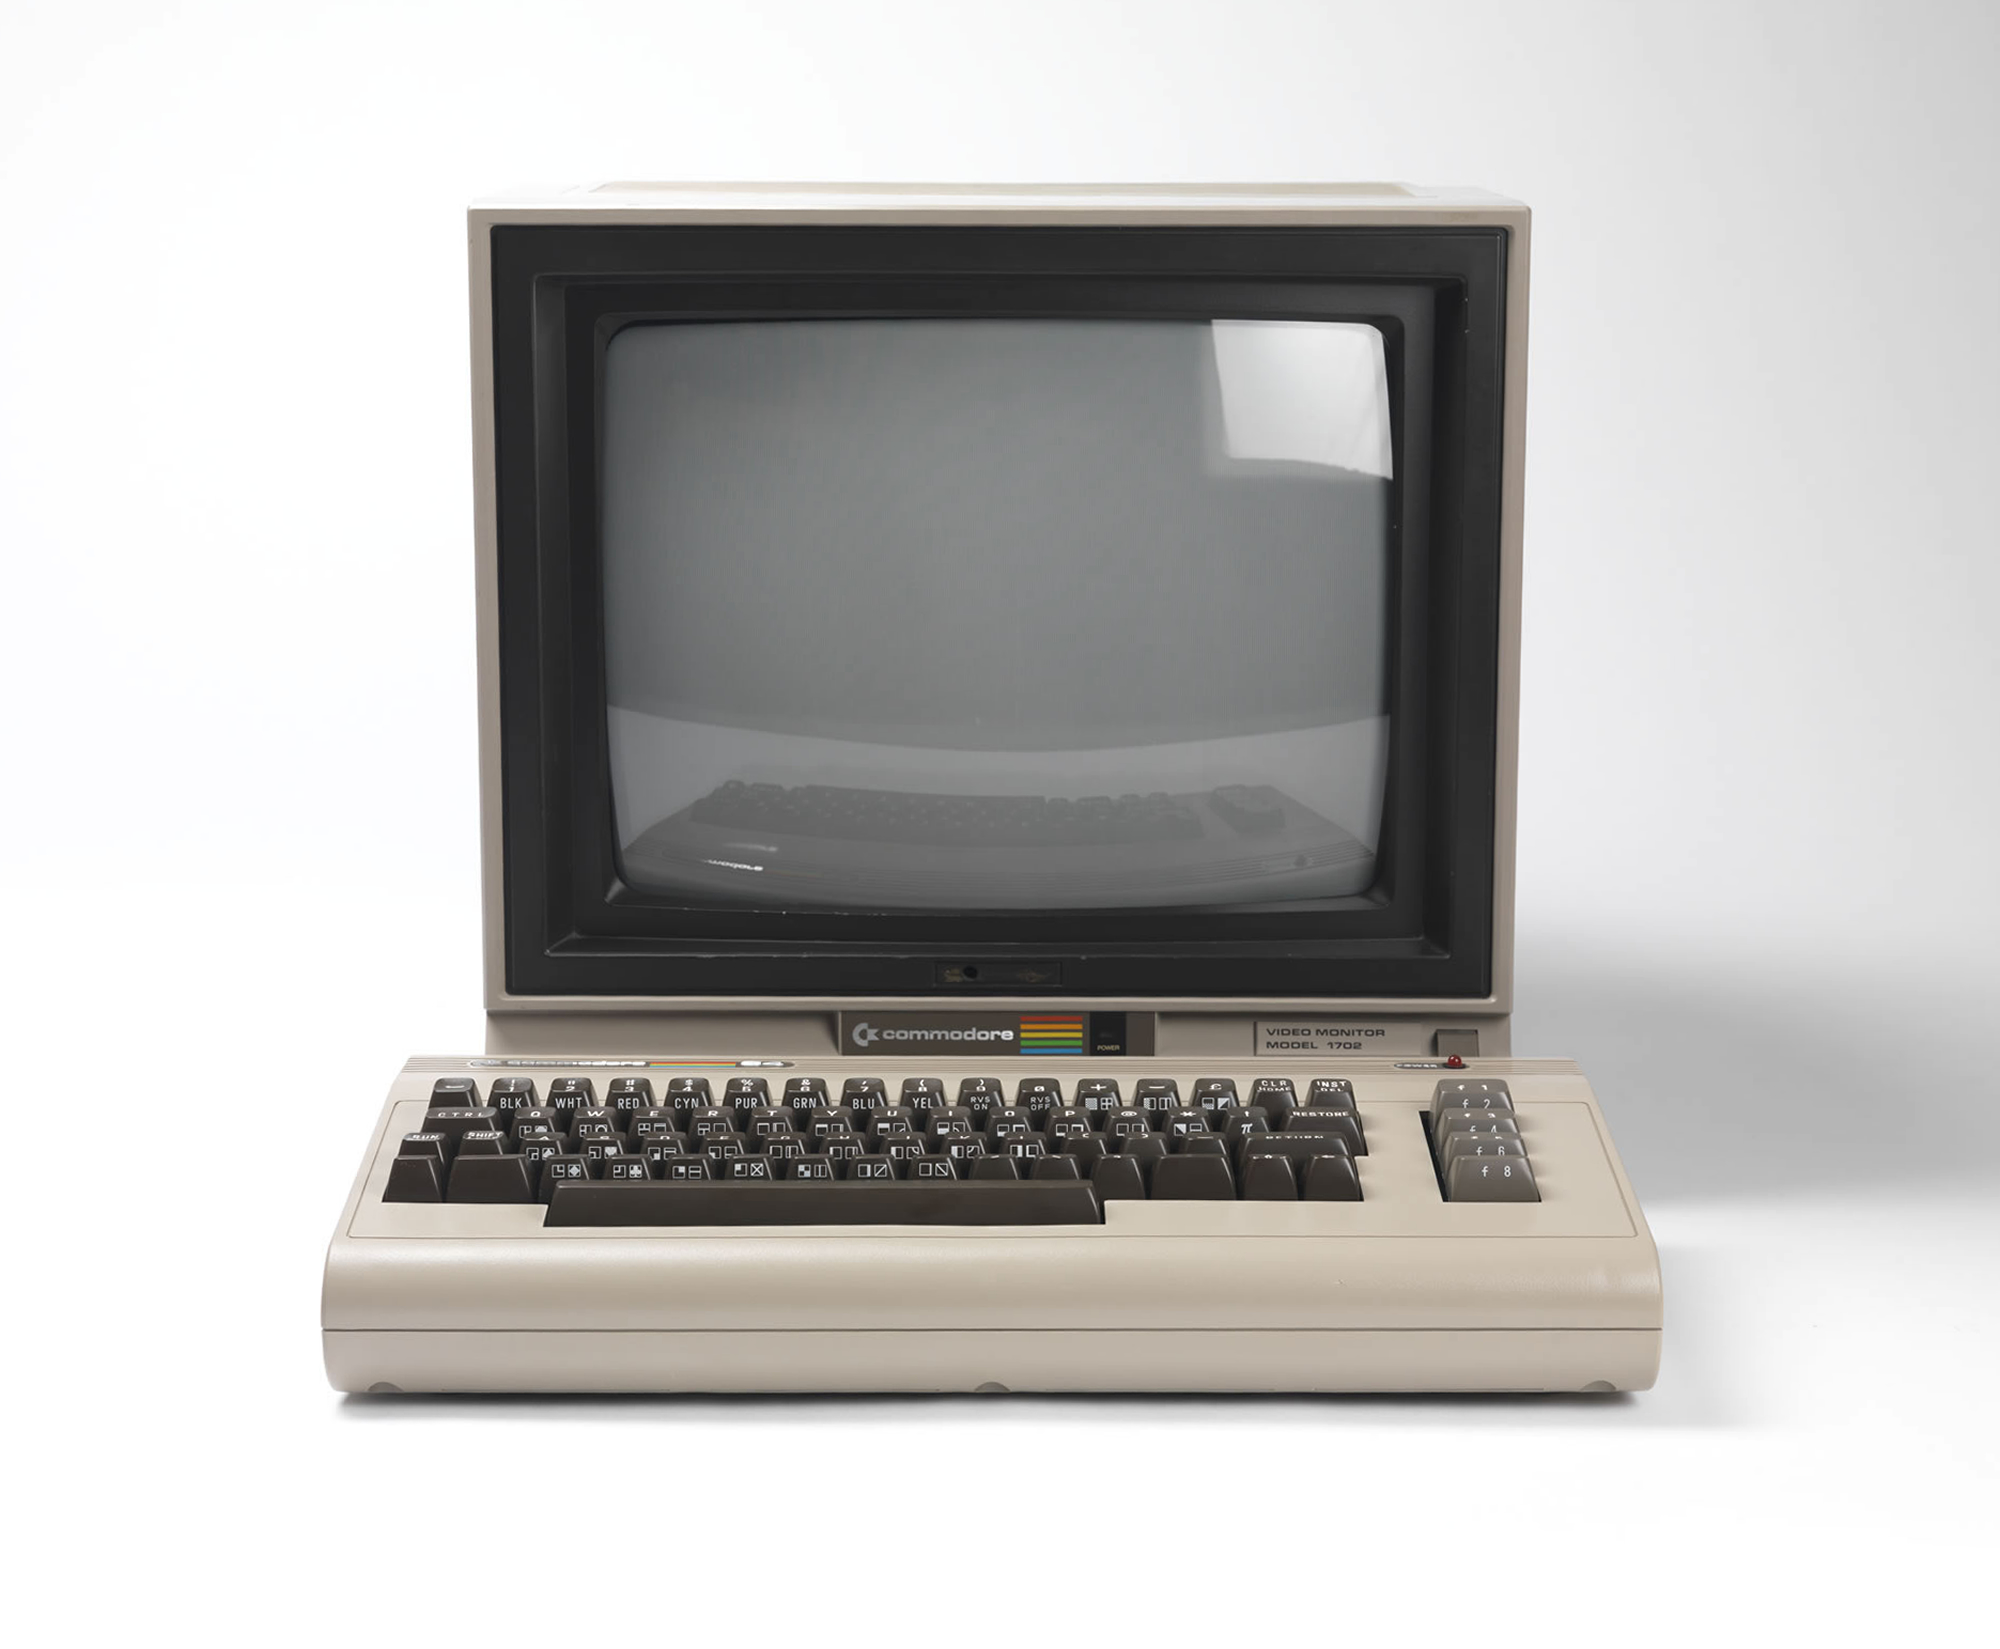 The Commodore 64 - Computers of Significant History 